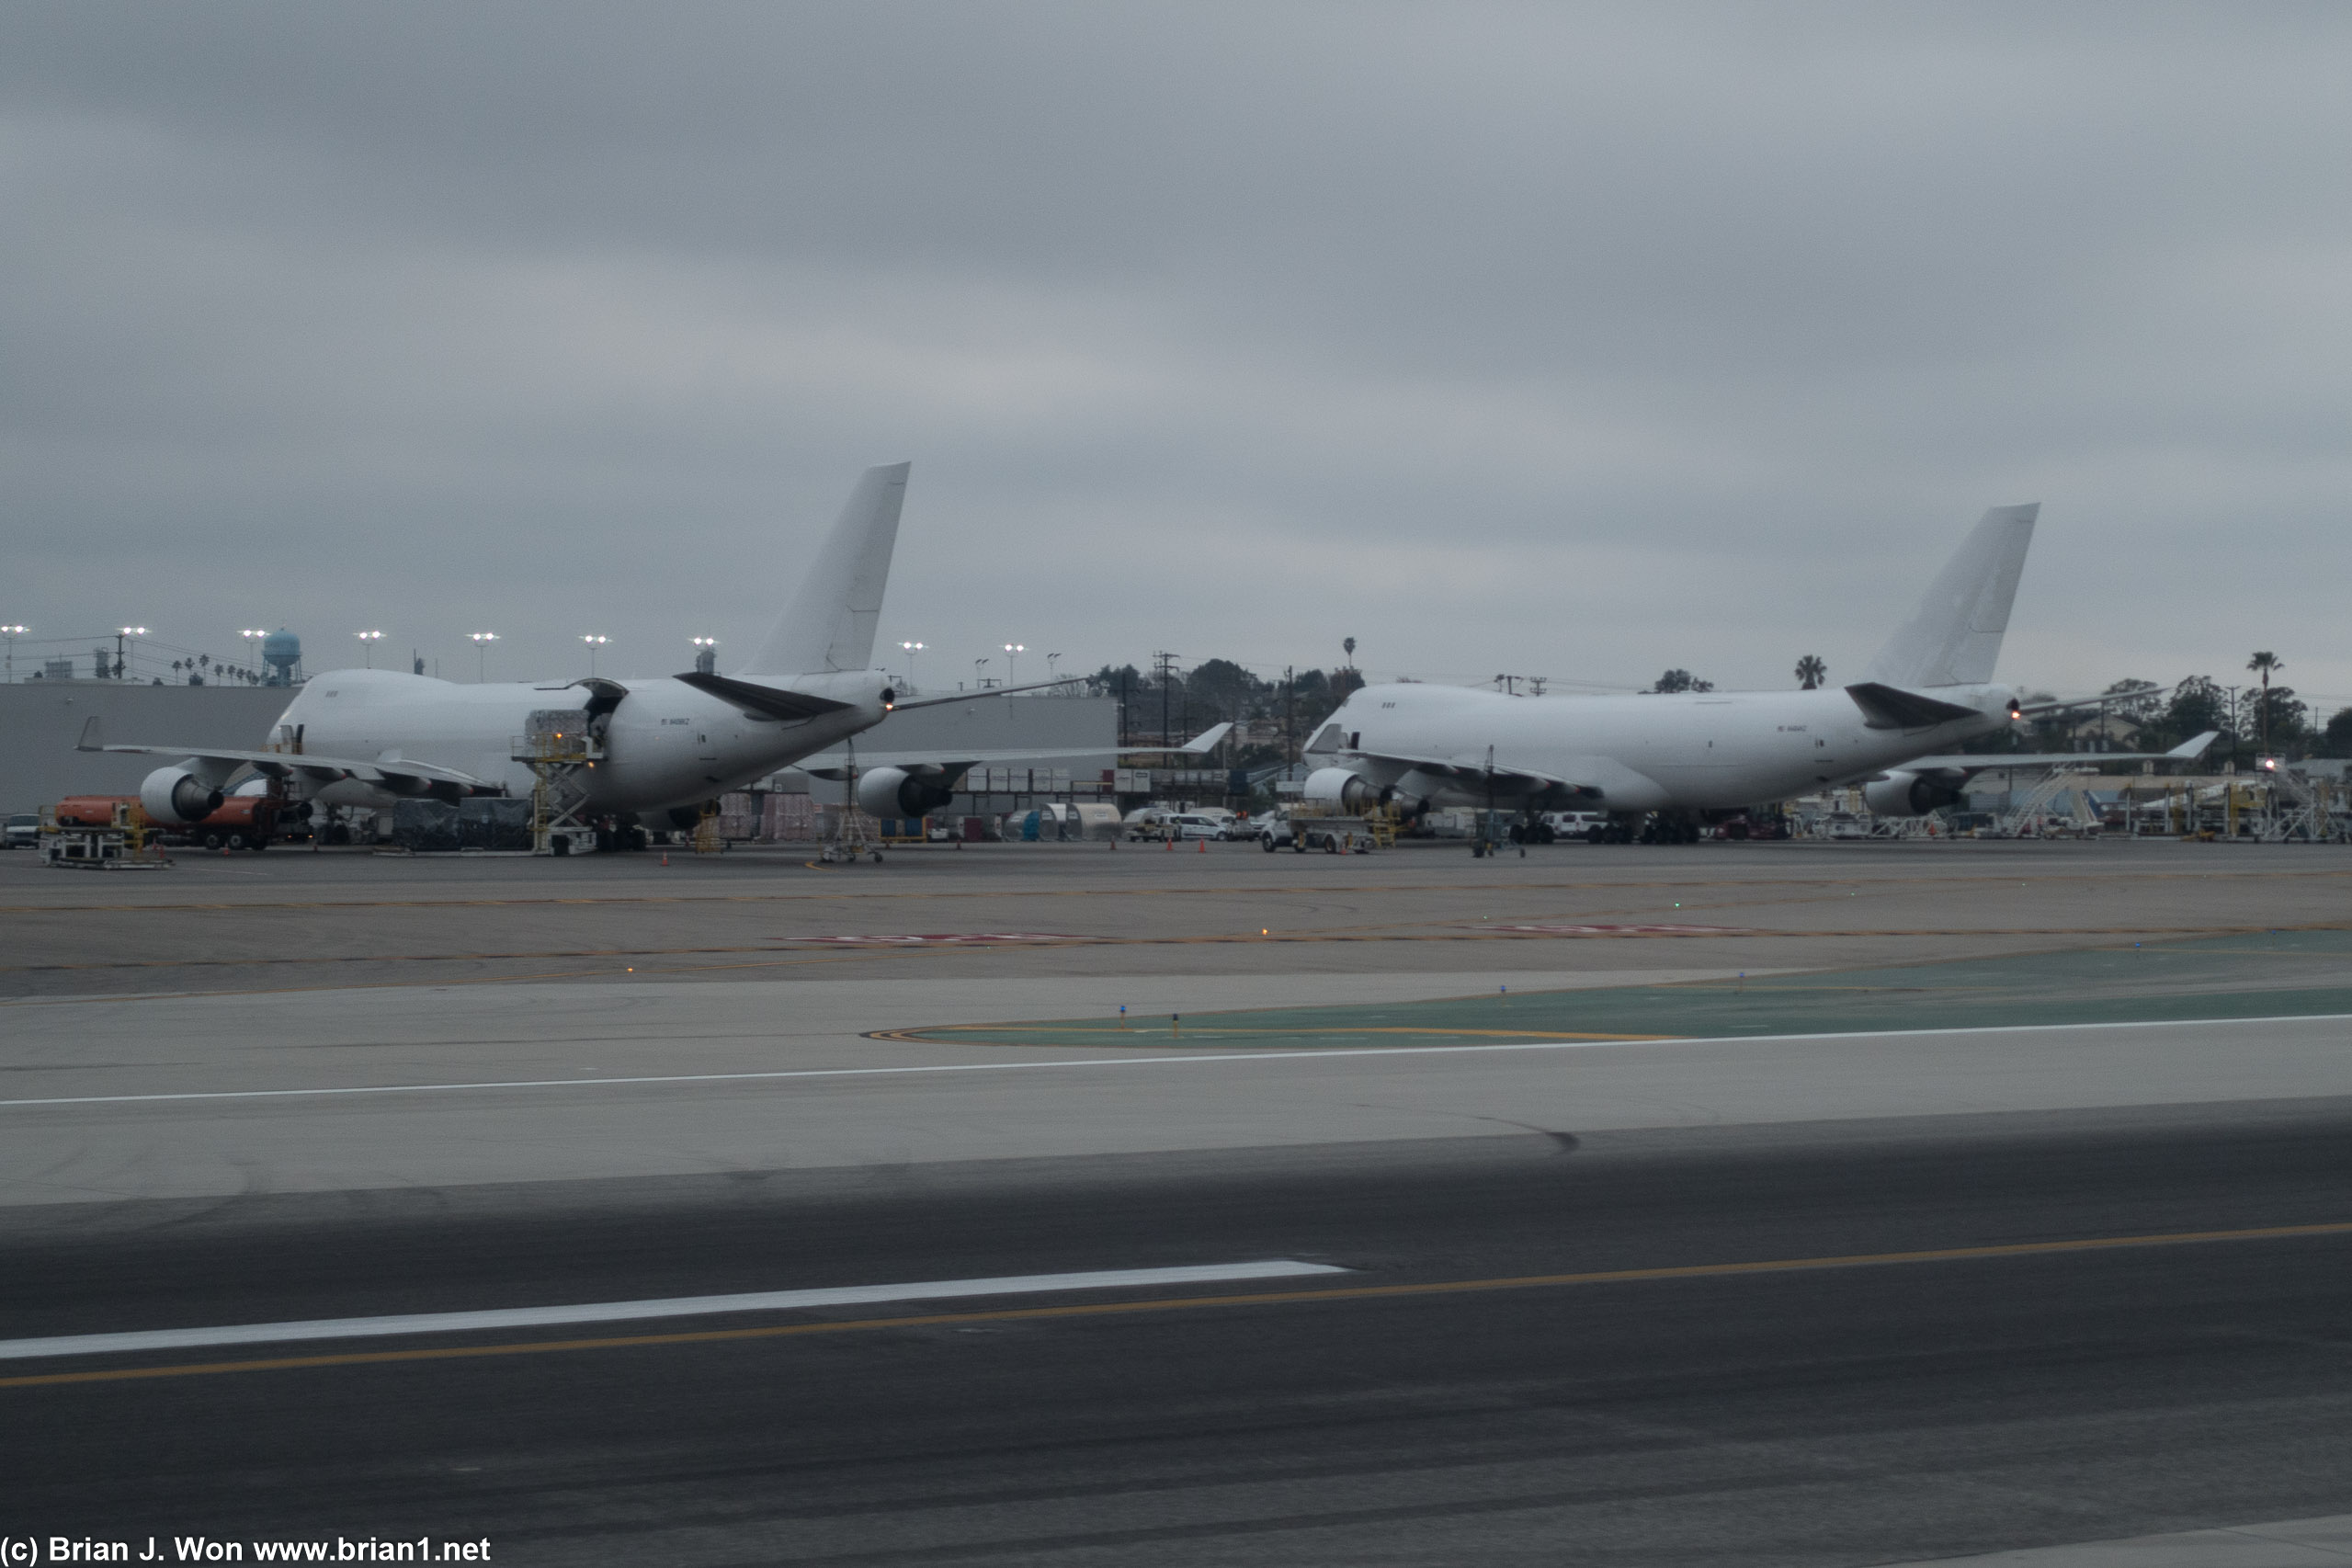 Pair of Boeing 747-400F's on the ramp at LAX.